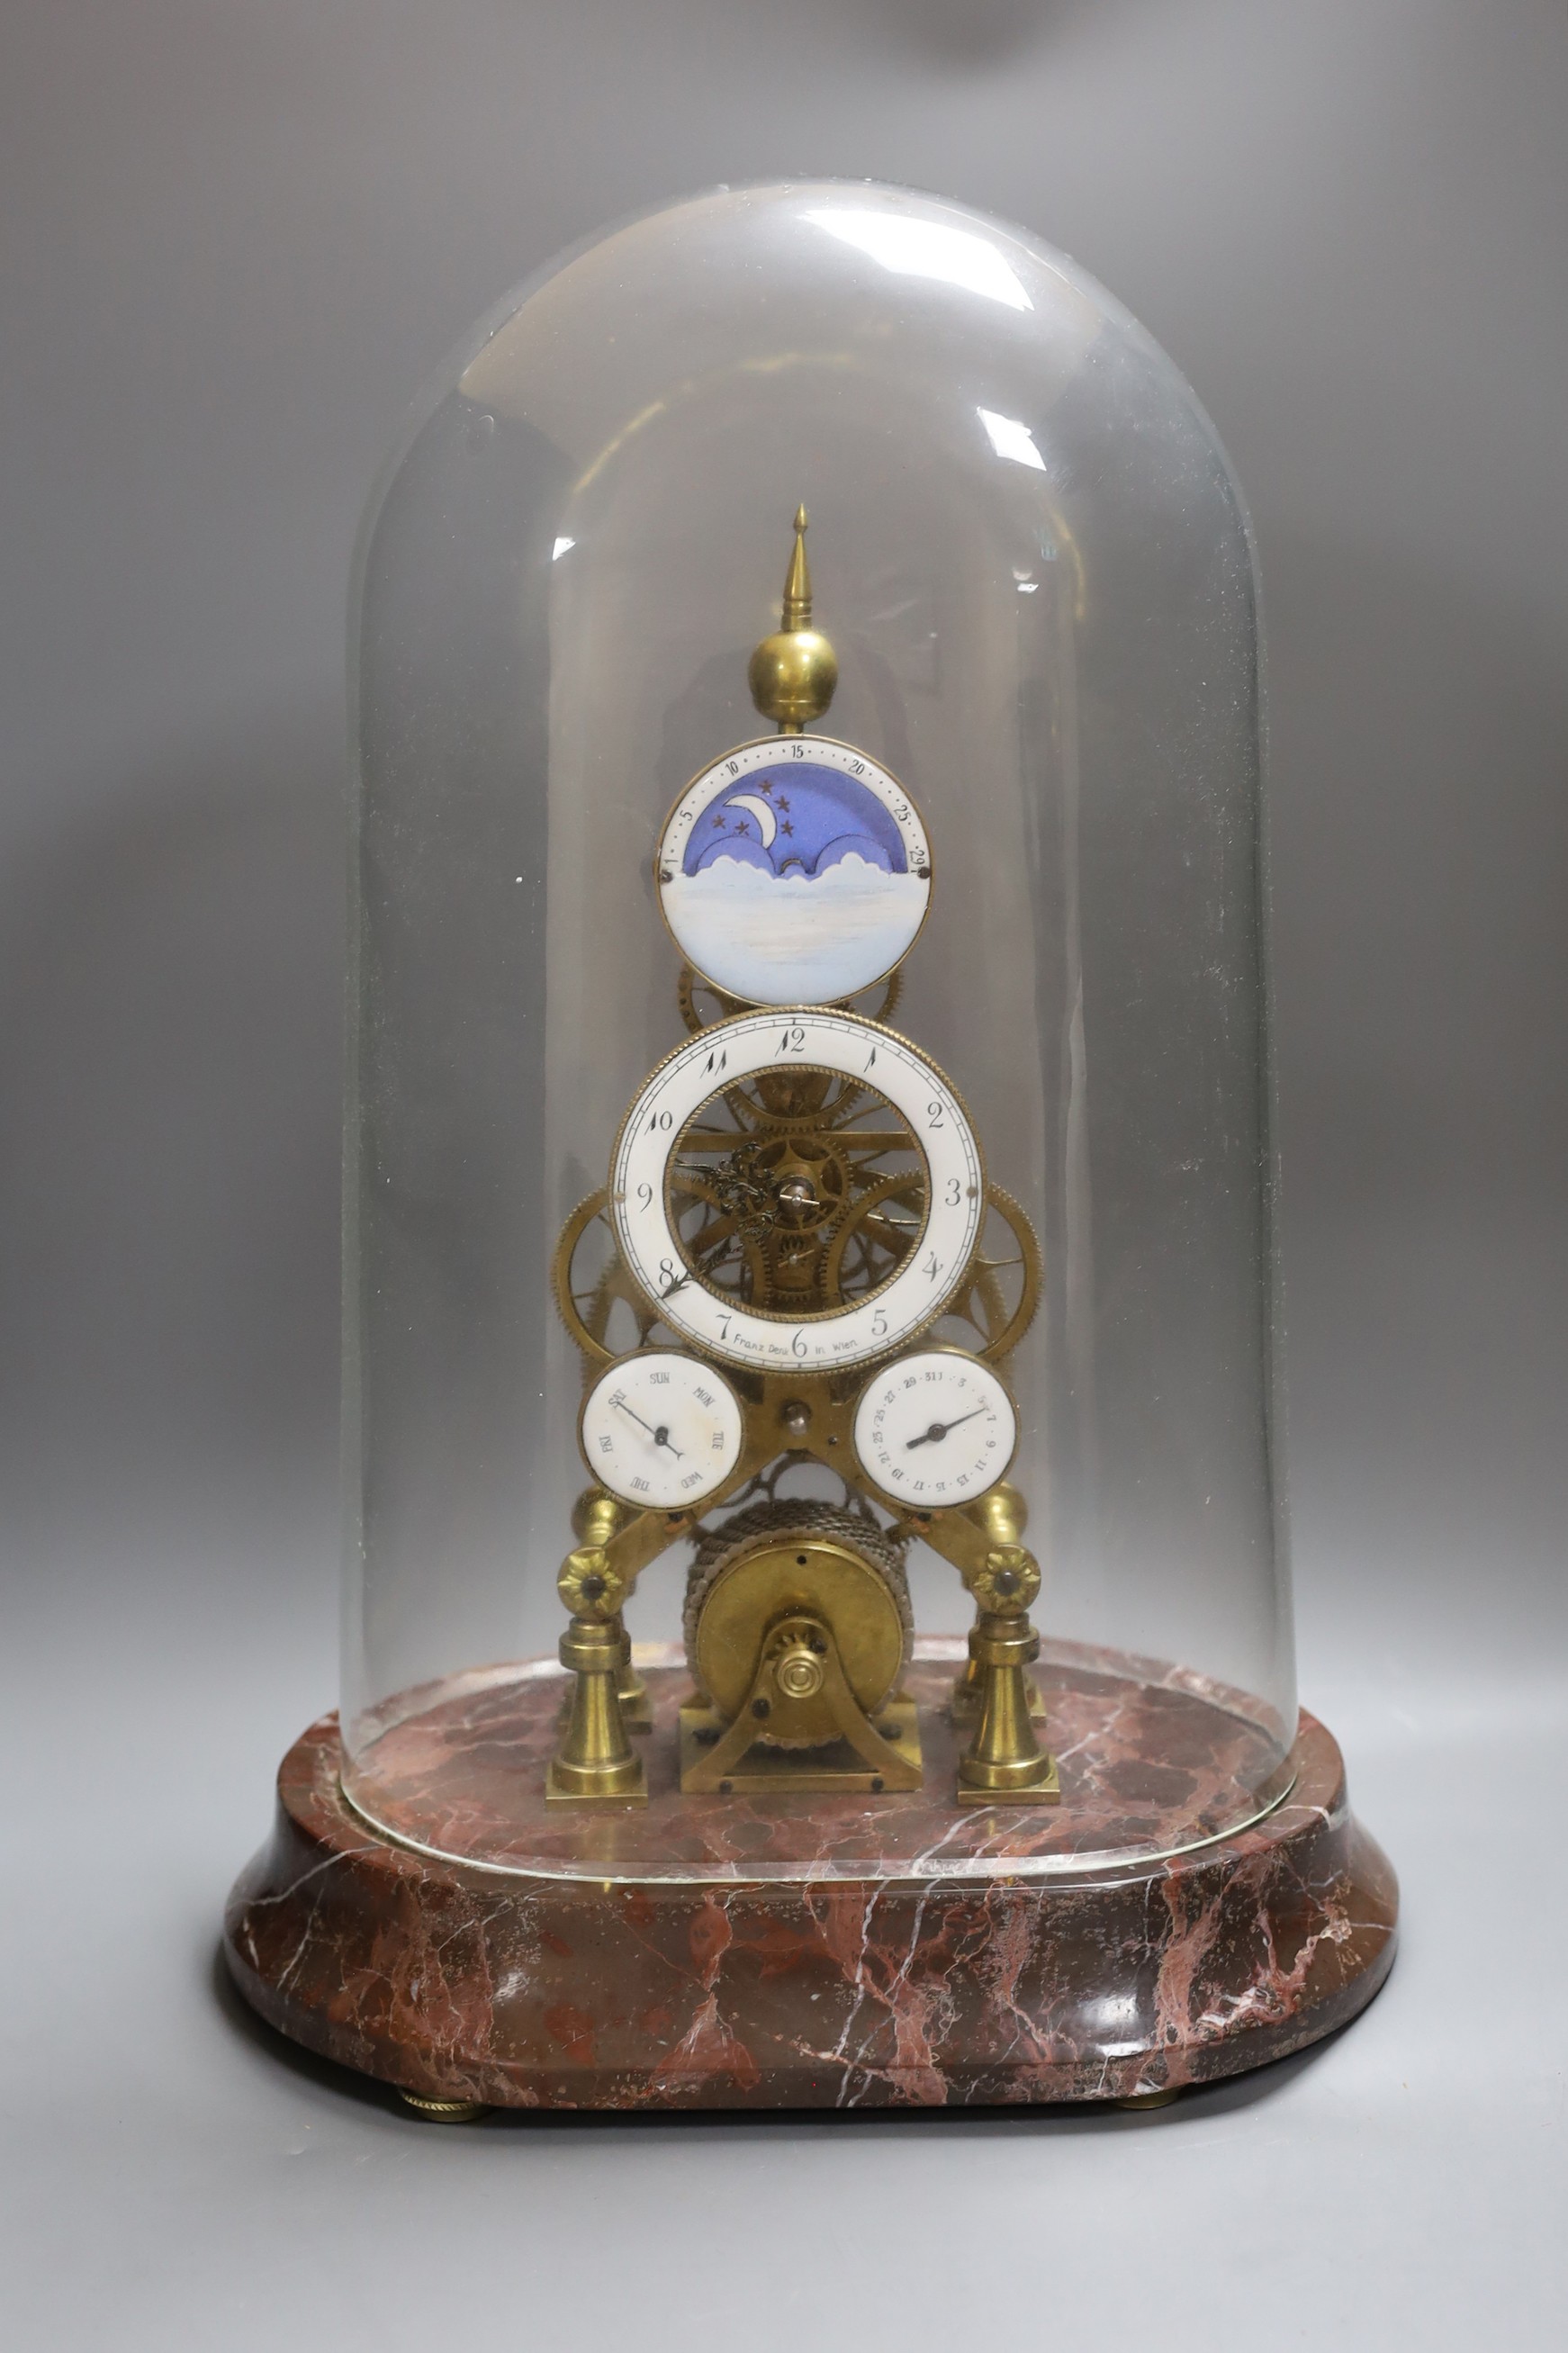 A calendar skeleton clock with moon phase dial, pin wheel escapement, dial signed Franz Denk in Wien, with pendulum, 50cm tall including dome